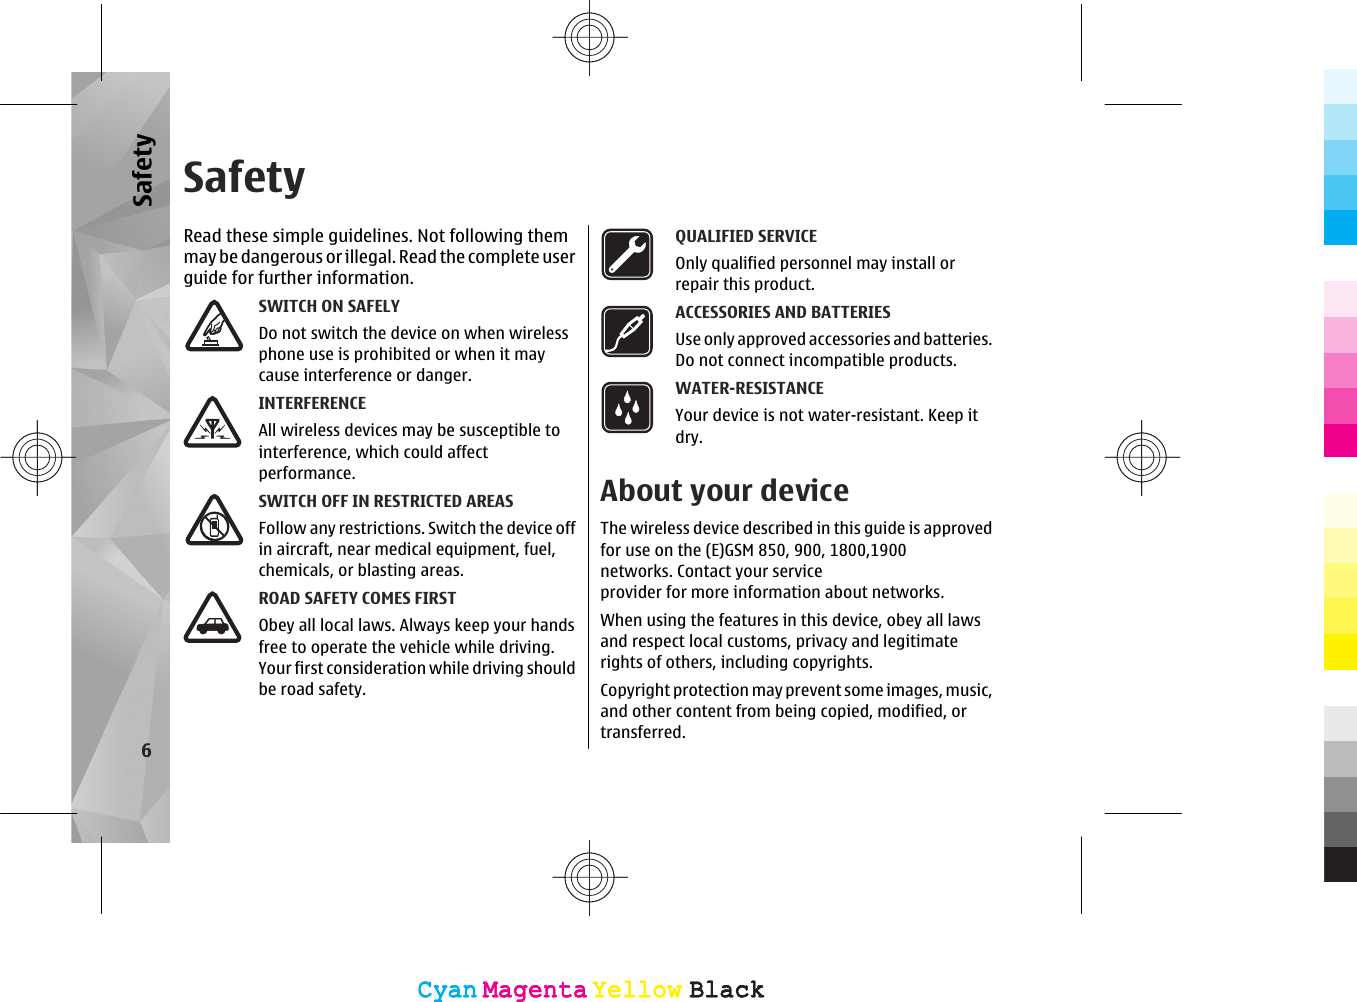 SafetyRead these simple guidelines. Not following themmay be dangerous or illegal. Read  the co mplete us erguide for further information.SWITCH ON SAFELYDo not switch the device on when wirelessphone use is prohibited or when it maycause interference or danger.INTERFERENCEAll wireless devices may be susceptible tointerference, which could affectperformance.SWITCH OFF IN RESTRICTED AREASFollow any restrictions. Switch the device offin aircraft, near medical equipment, fuel,chemicals, or blasting areas.ROAD SAFETY COMES FIRSTObey all local laws. Always keep your handsfree to operate the vehicle while driving.Your first consideration while driving shouldbe road safety.QUALIFIED SERVICEOnly qualified personnel may install orrepair this product.ACCESSORIES AND BATTERIESUse only approved accessories and batteries.Do not connect incompatible products.WATER-RESISTANCEYour device is not water-resistant. Keep itdry.About your deviceThe wireless device described in this guide is approvedfor use on the (E)GSM 850, 900, 1800,1900networks. Contact your serviceprovider for more information about networks.When using the features in this device, obey all lawsand respect local customs, privacy and legitimaterights of others, including copyrights.Copyright protection may prevent some images, music,and other content from being copied, modified, ortransferred.6SafetyCyanCyanMagentaMagentaYellowYellowBlackBlackCyanCyanMagentaMagentaYellowYellowBlackBlack